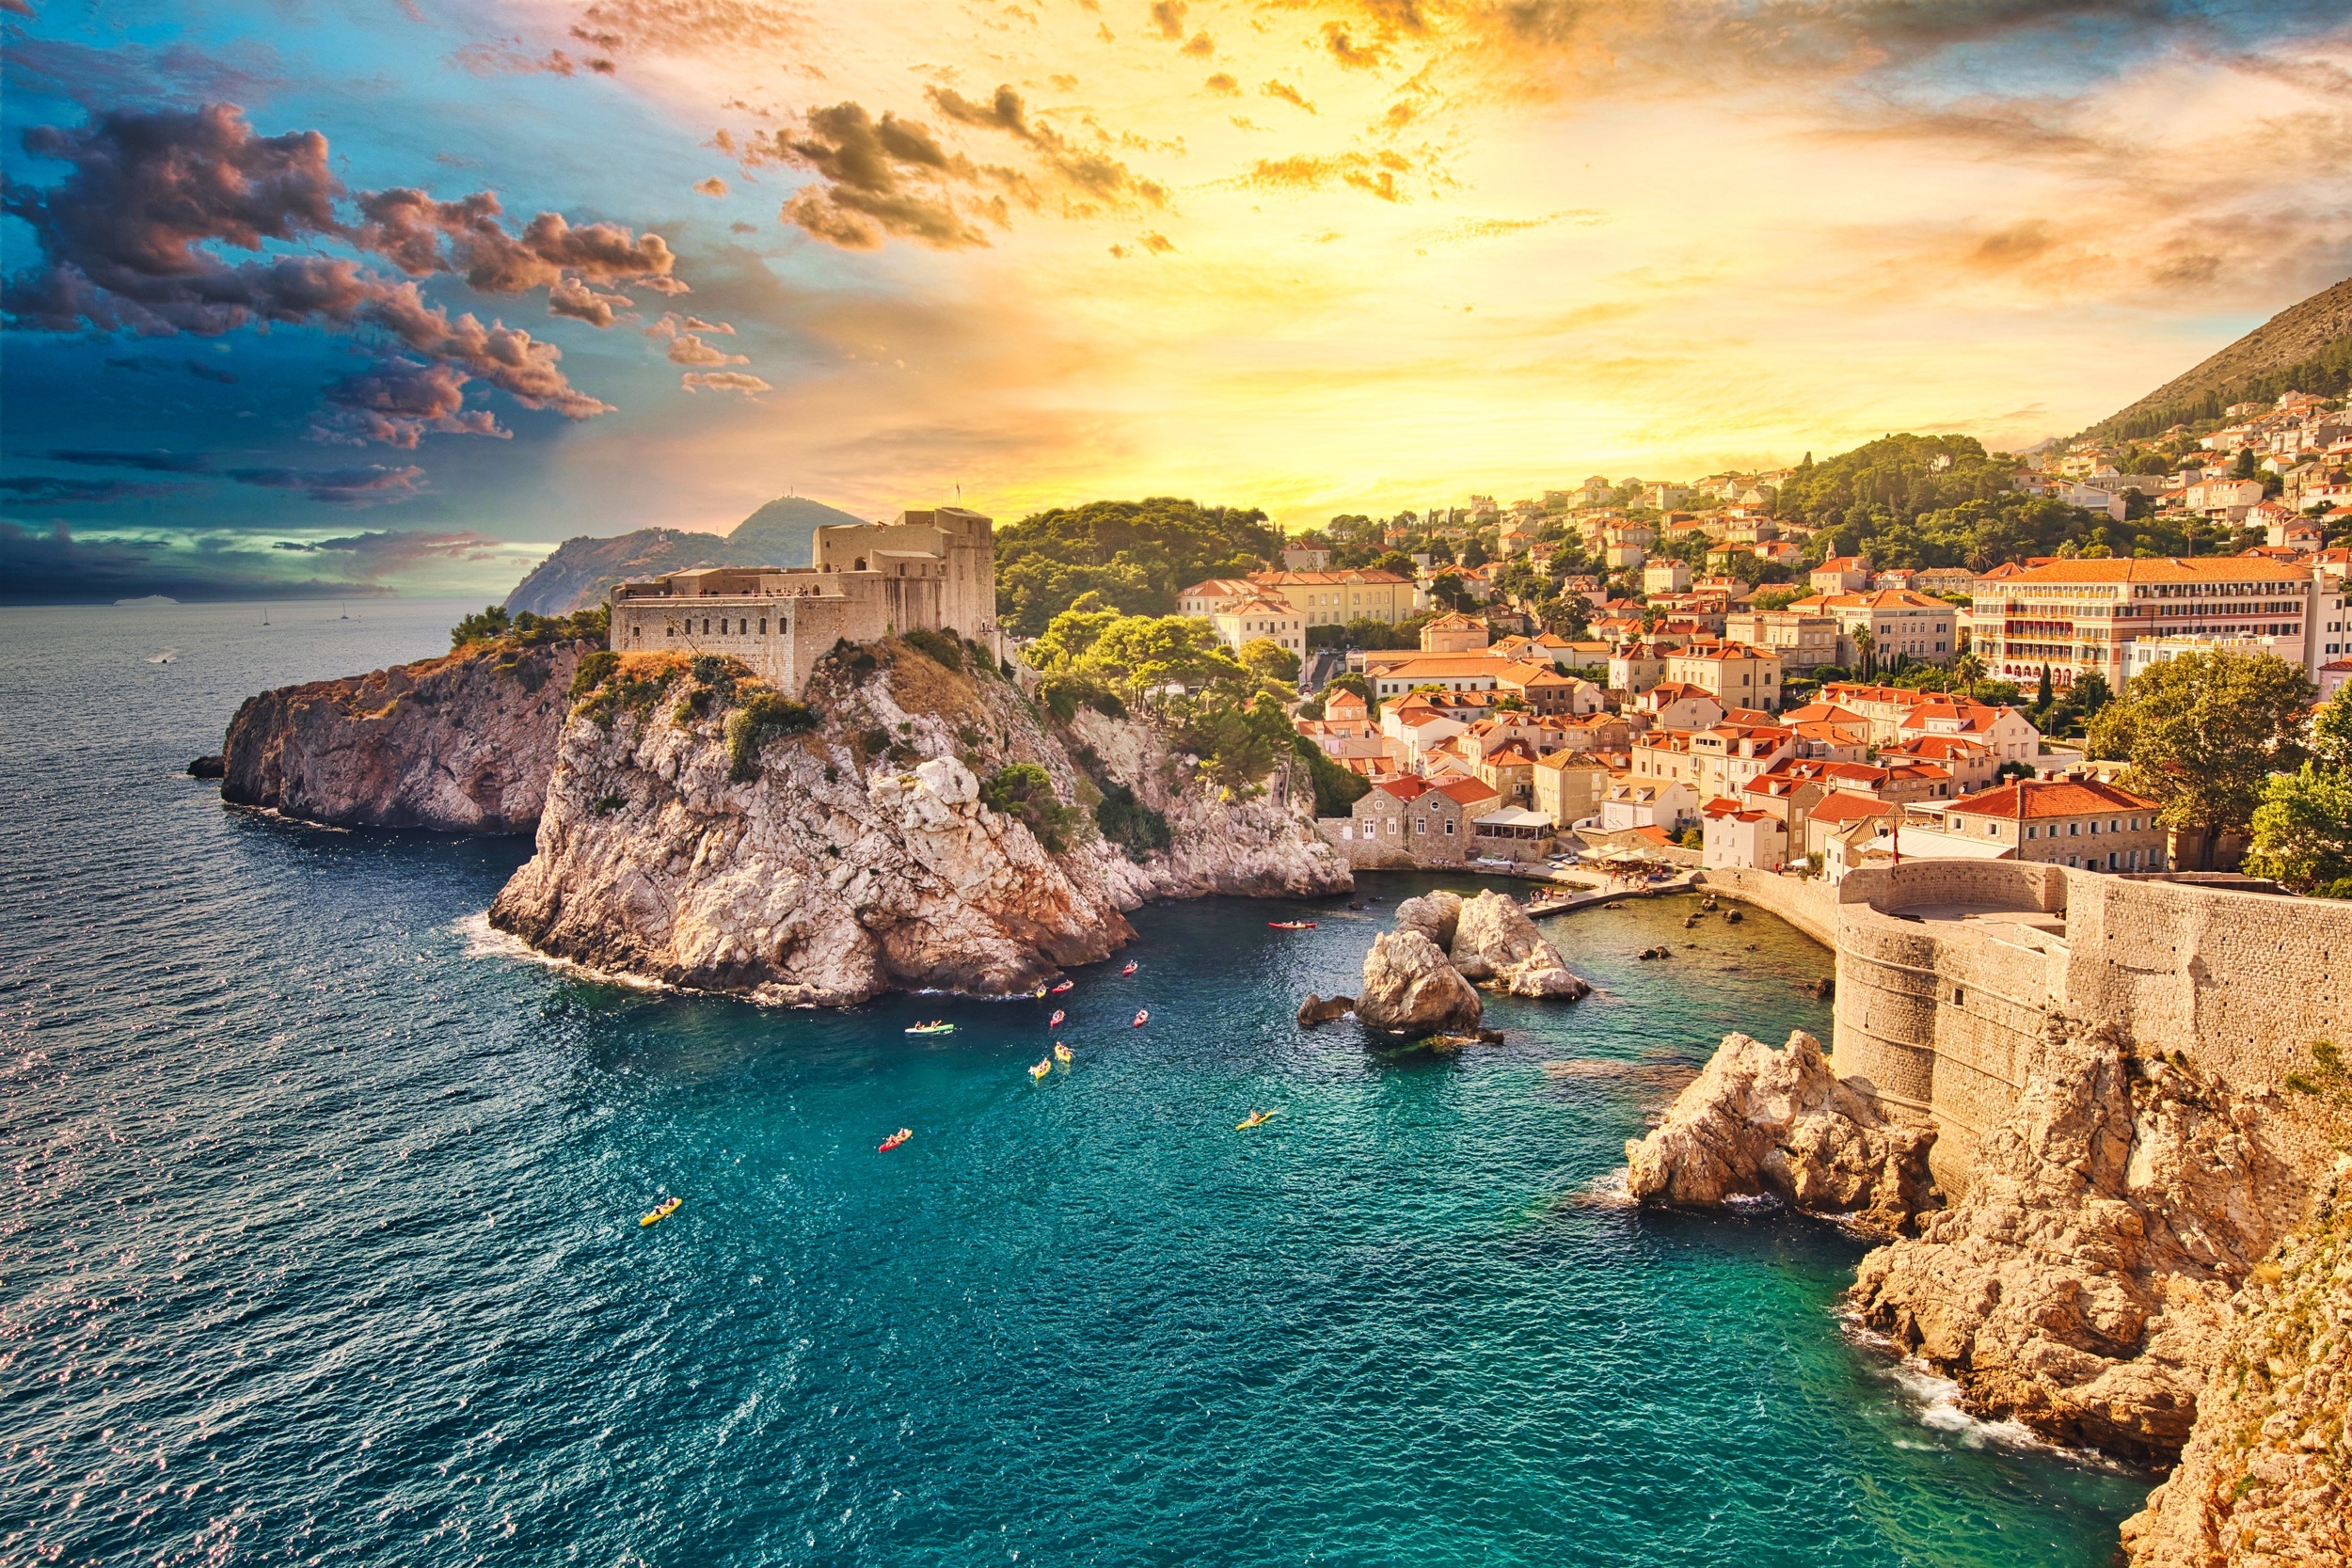 <p>This list, of course, couldn’t have been completed without mentioning arguably the most famous destination in the Balkans. <em>Game of Thrones</em> ensured the city is now on every traveler’s wishlist, so while you won’t ever have Dubrovnik to yourself, it’s still worth a visit. Enjoy views from atop the city walls, kayak around the hidden coves, and have dinner in the magical Old Town. </p><p>You may also like: <a href='https://www.yardbarker.com/lifestyle/articles/the_14_most_beautiful_beach_towns_on_the_west_coast_110723/s1__38578337'>The 14 most beautiful beach towns on the West Coast</a></p>